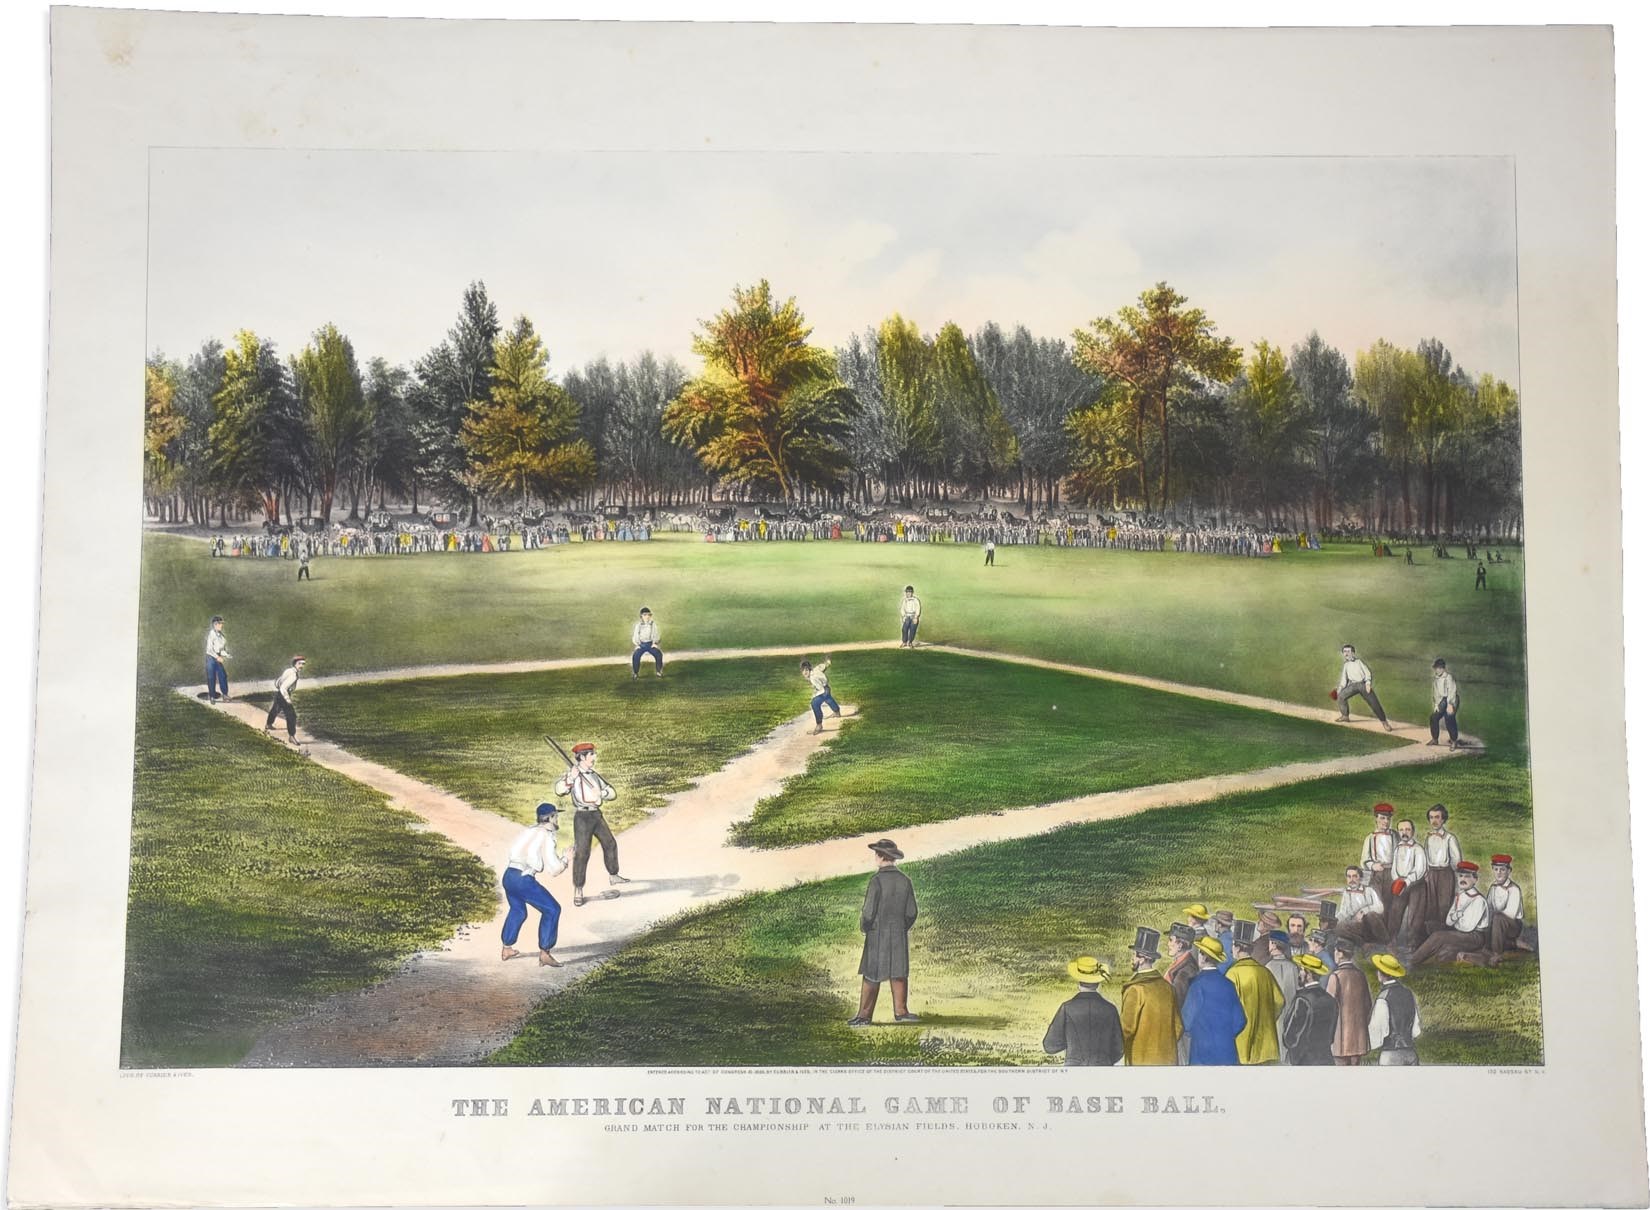 - 1942 Currier & Ives Baseball Restrike by Andres Inc of NY